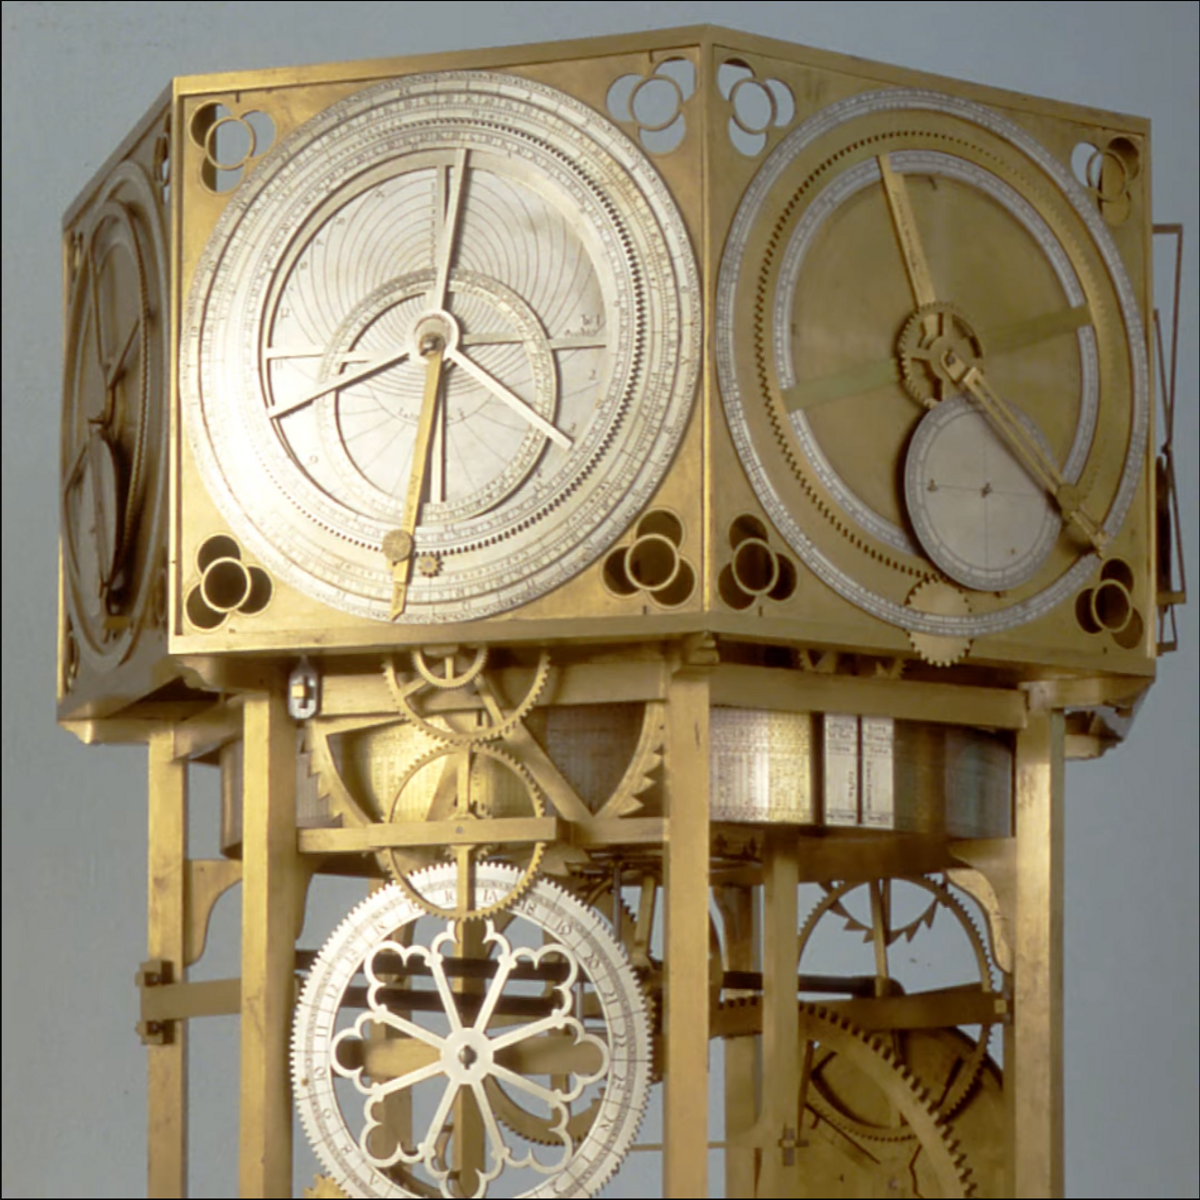 Giovanni Dondi of Padua, Italy, constructs his Astrarium, an astronomical clock